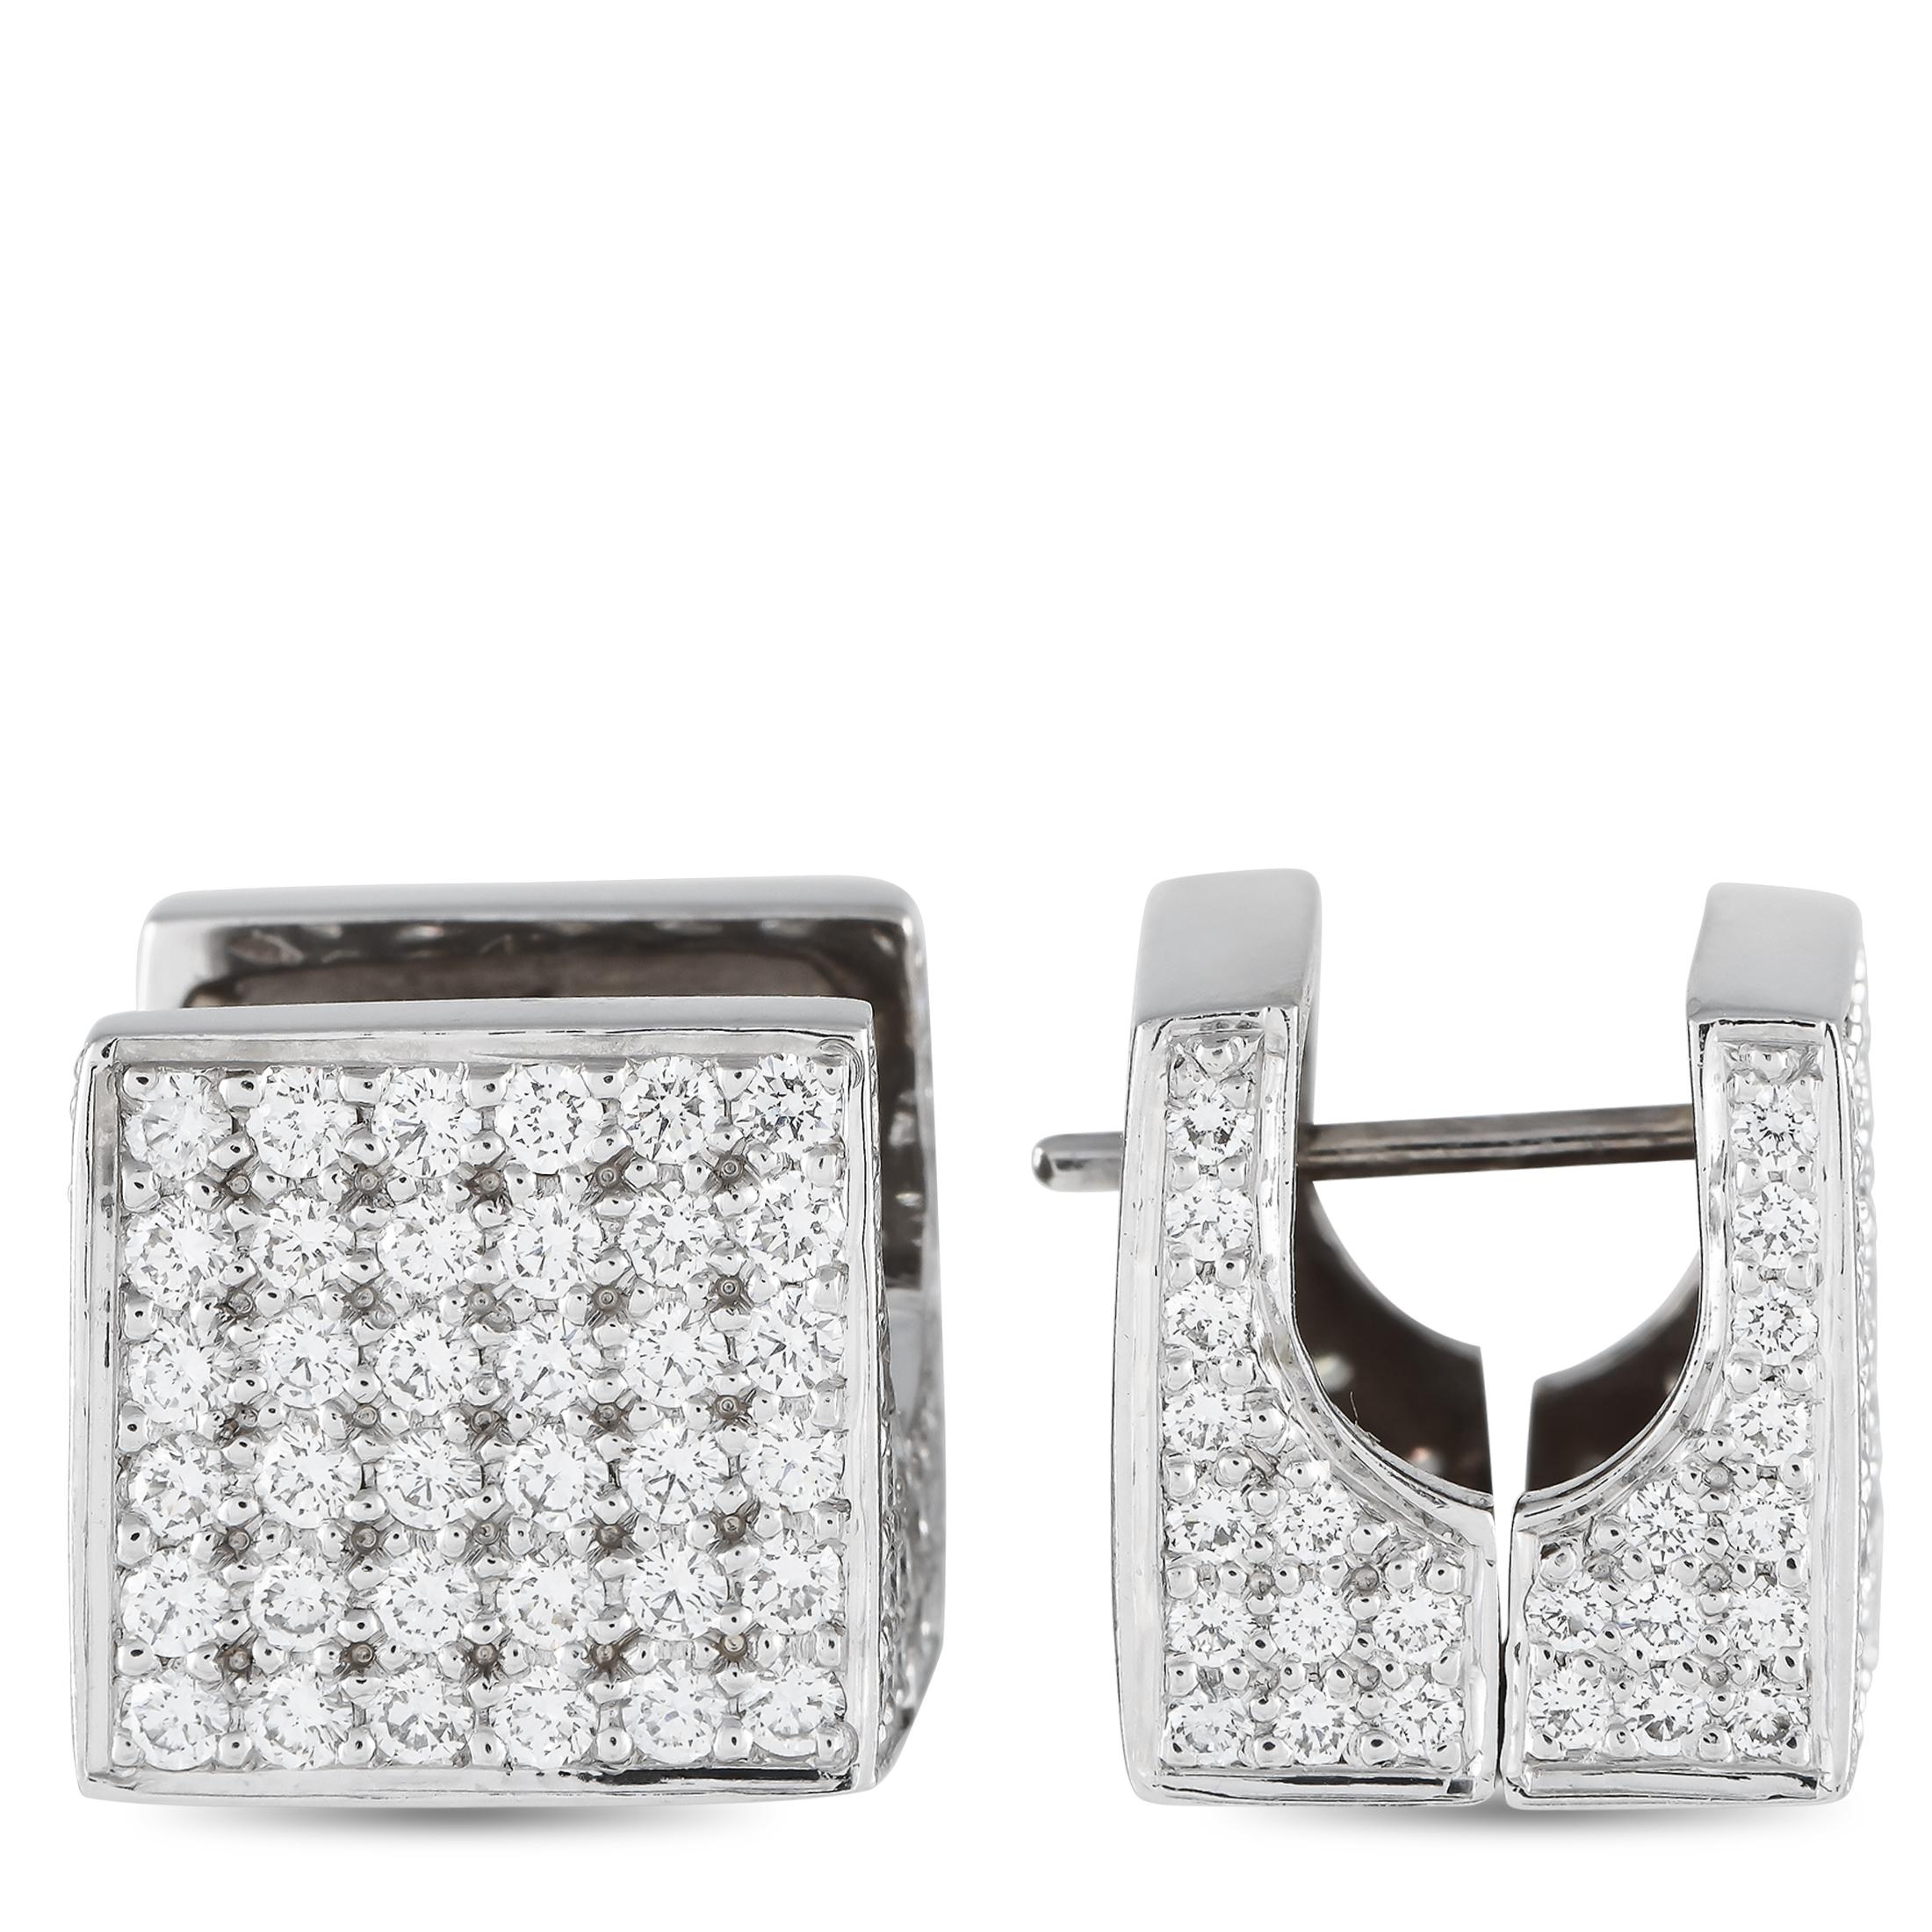 These cube-shaped earrings are chic, modern, and incredibly elegant. Covered in Diamonds with a total weight of 1.55 carats, each one features a sleek 14K White Gold setting measuring 0.5 long by 0.5 wide.This jewelry piece is offered in estate